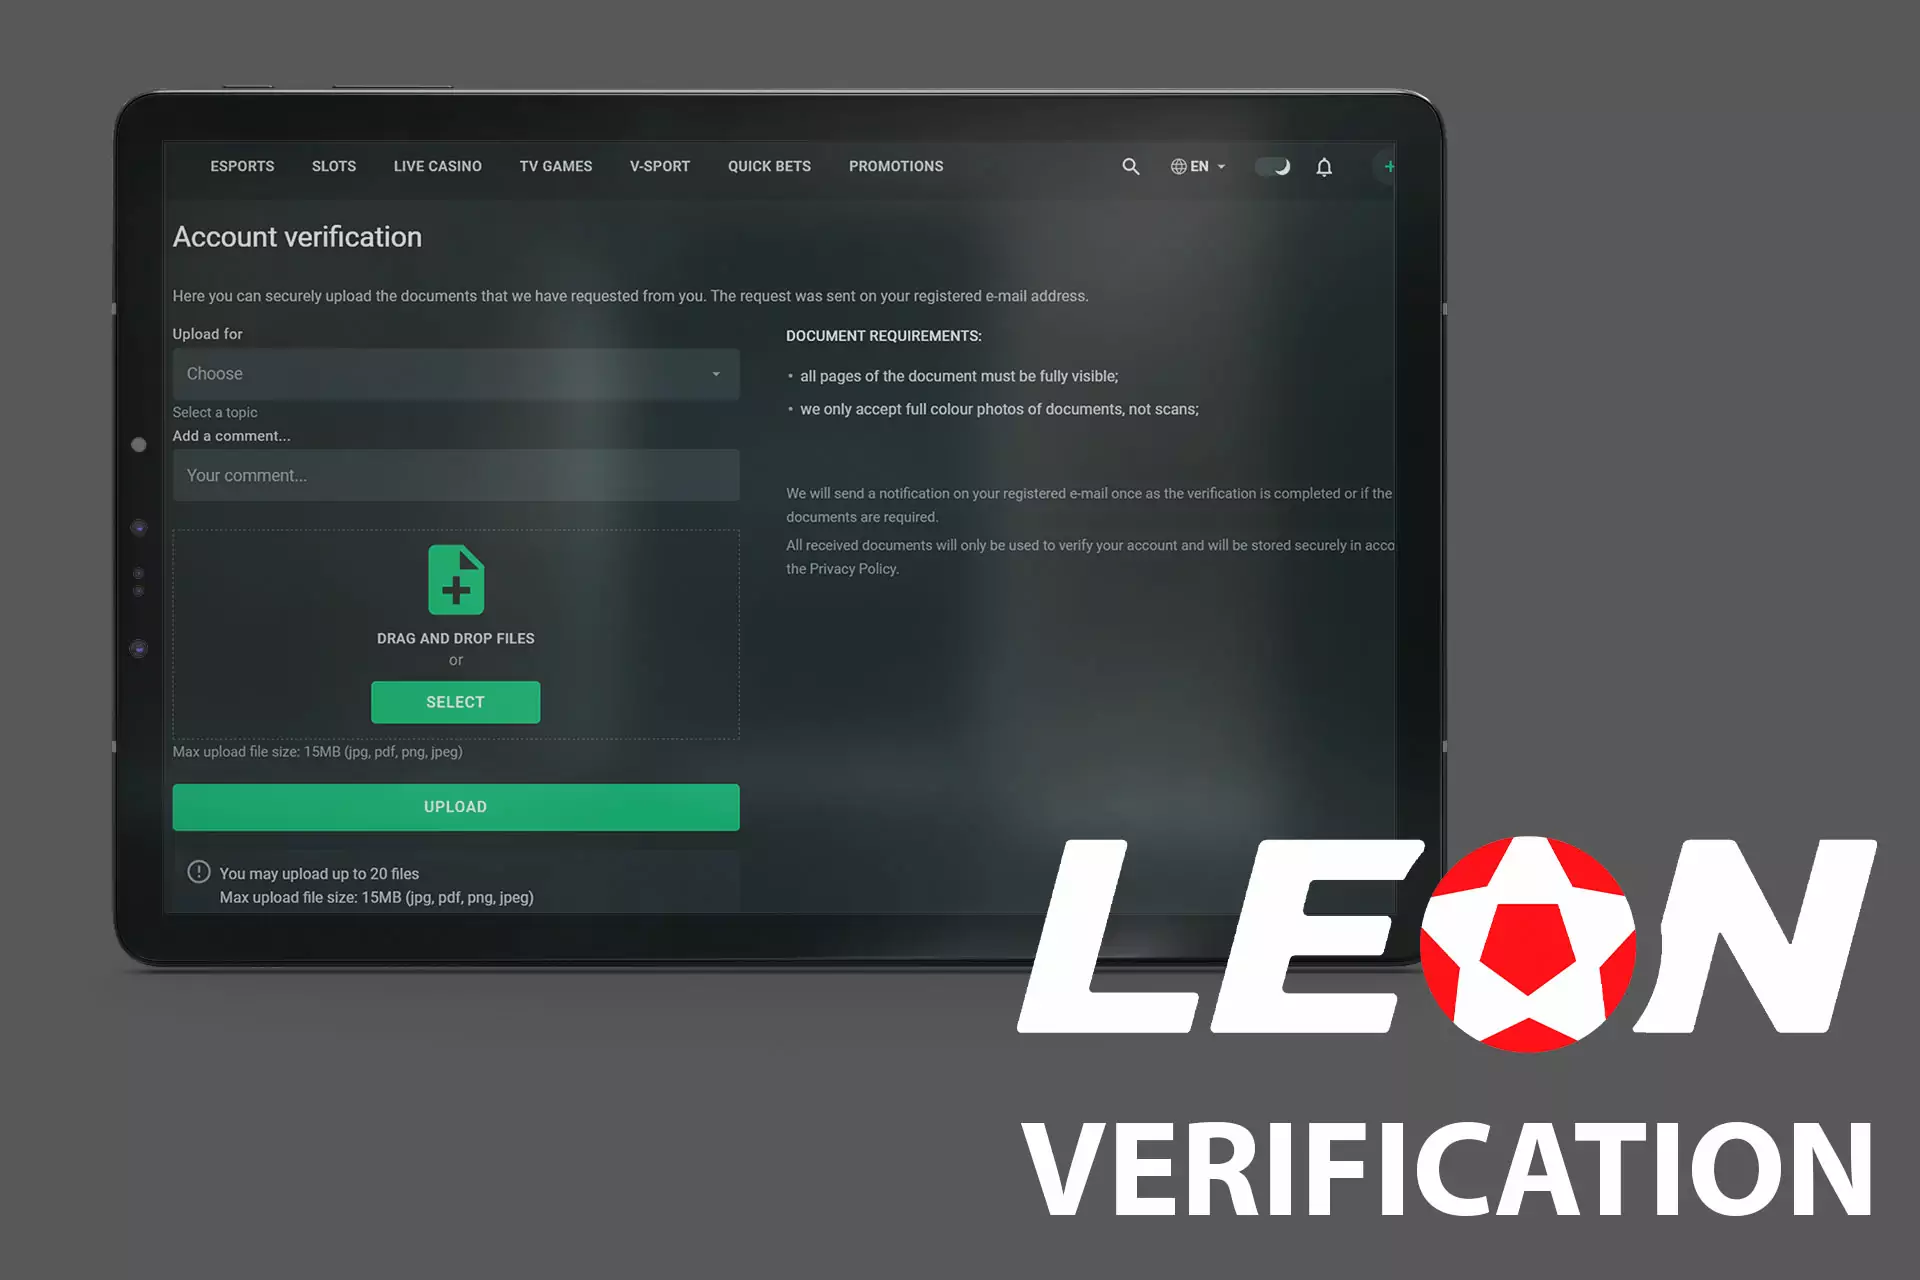 You should verify your account to withdraw winnings from Leon.